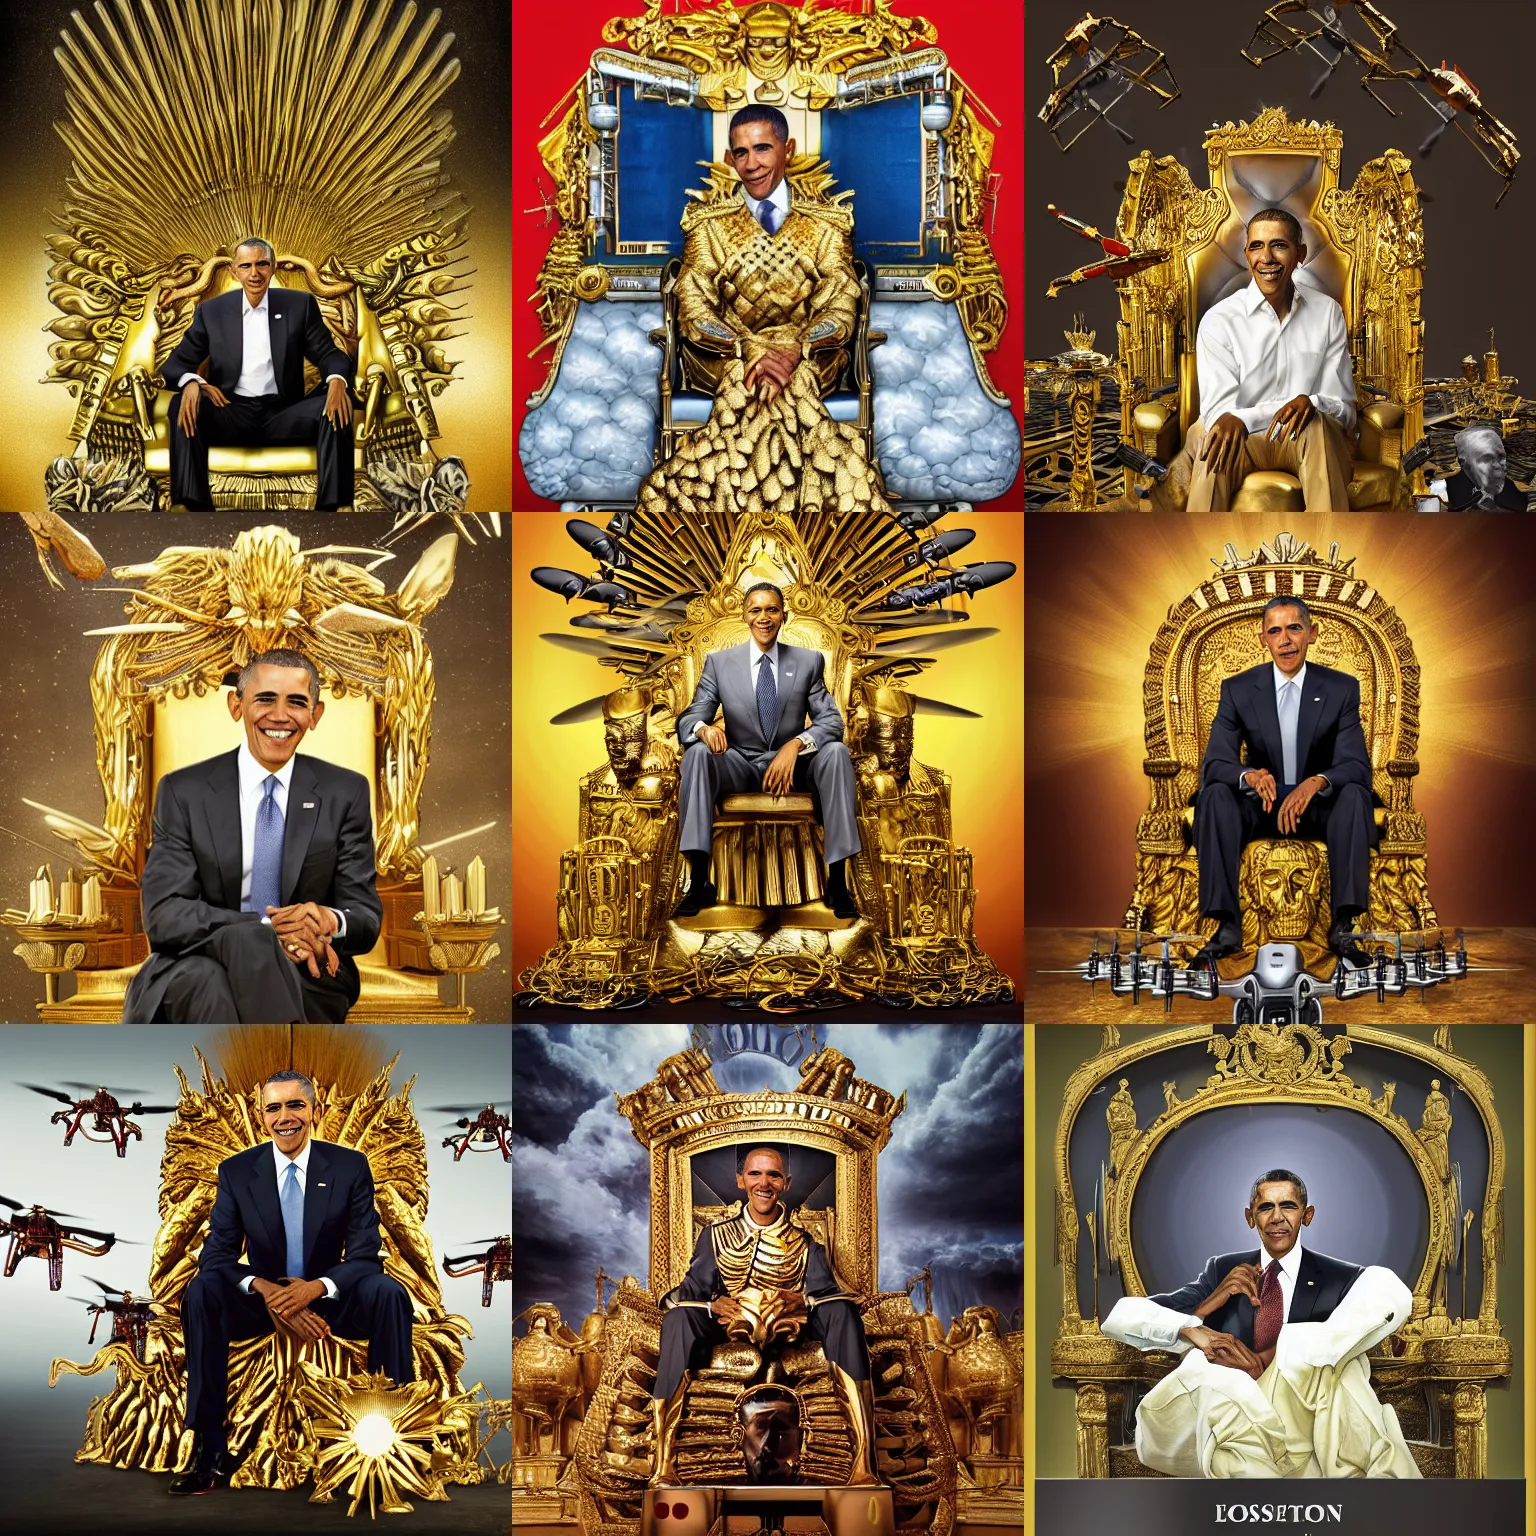 Prompt: hyperrealistic illustration portrait of Barack Obama The Drone King sitting on a golden throne with predator drones flying out from under it, Copyright TIME Magazine, (EOS 5DS R, ISO100, f/8, 1/125, 84mm, modelsociety, prime lense)